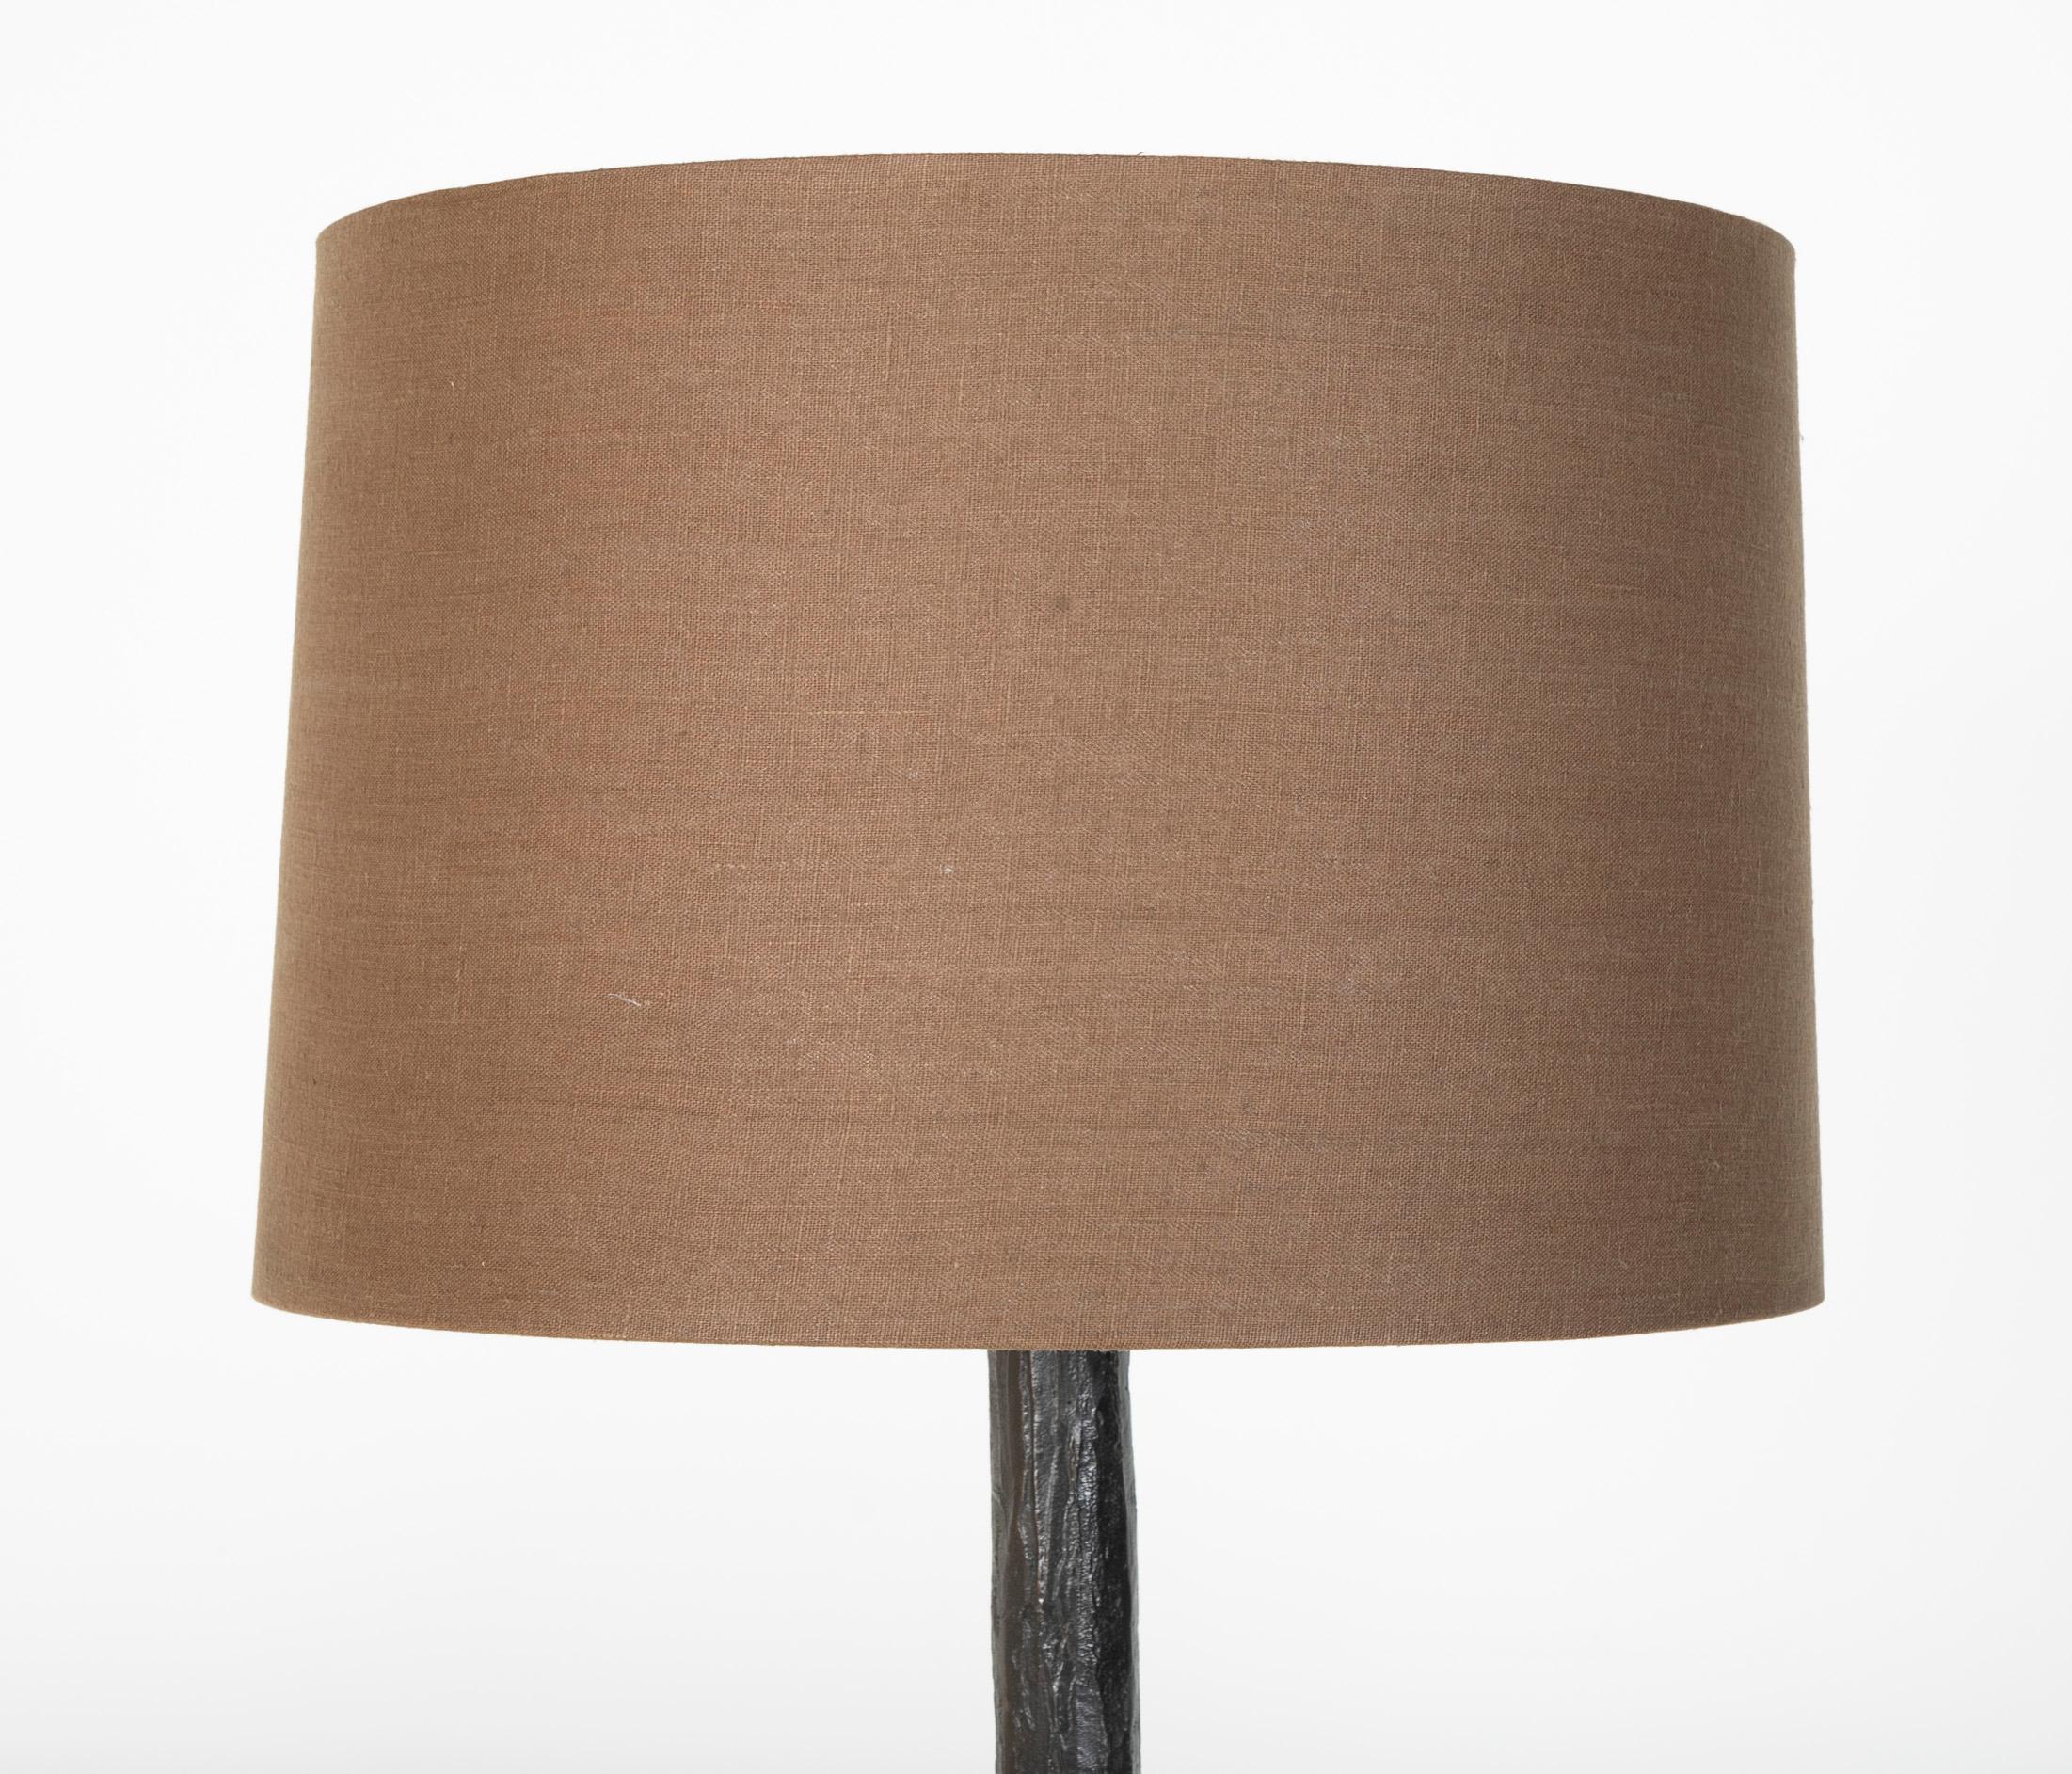 Giacommeti style floor lamp in patinated bronze. Designed by Michael Schaible and Robert Bray.